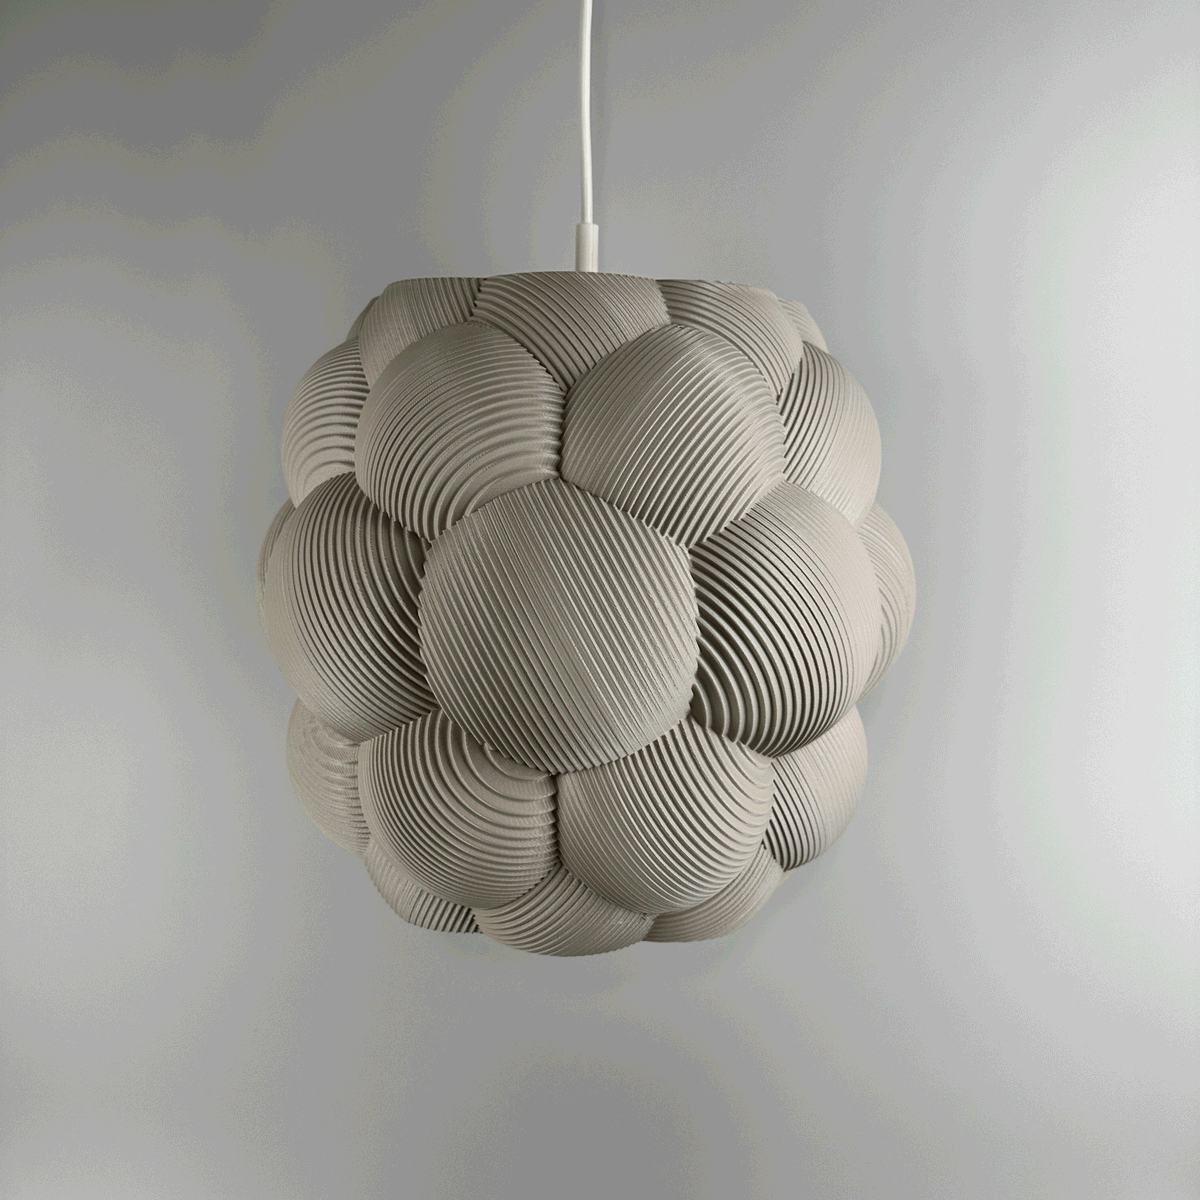 3D printed Apo Malli lampshade in modern design in muted white biodegradable material. Used with 400k LED bulb on and off